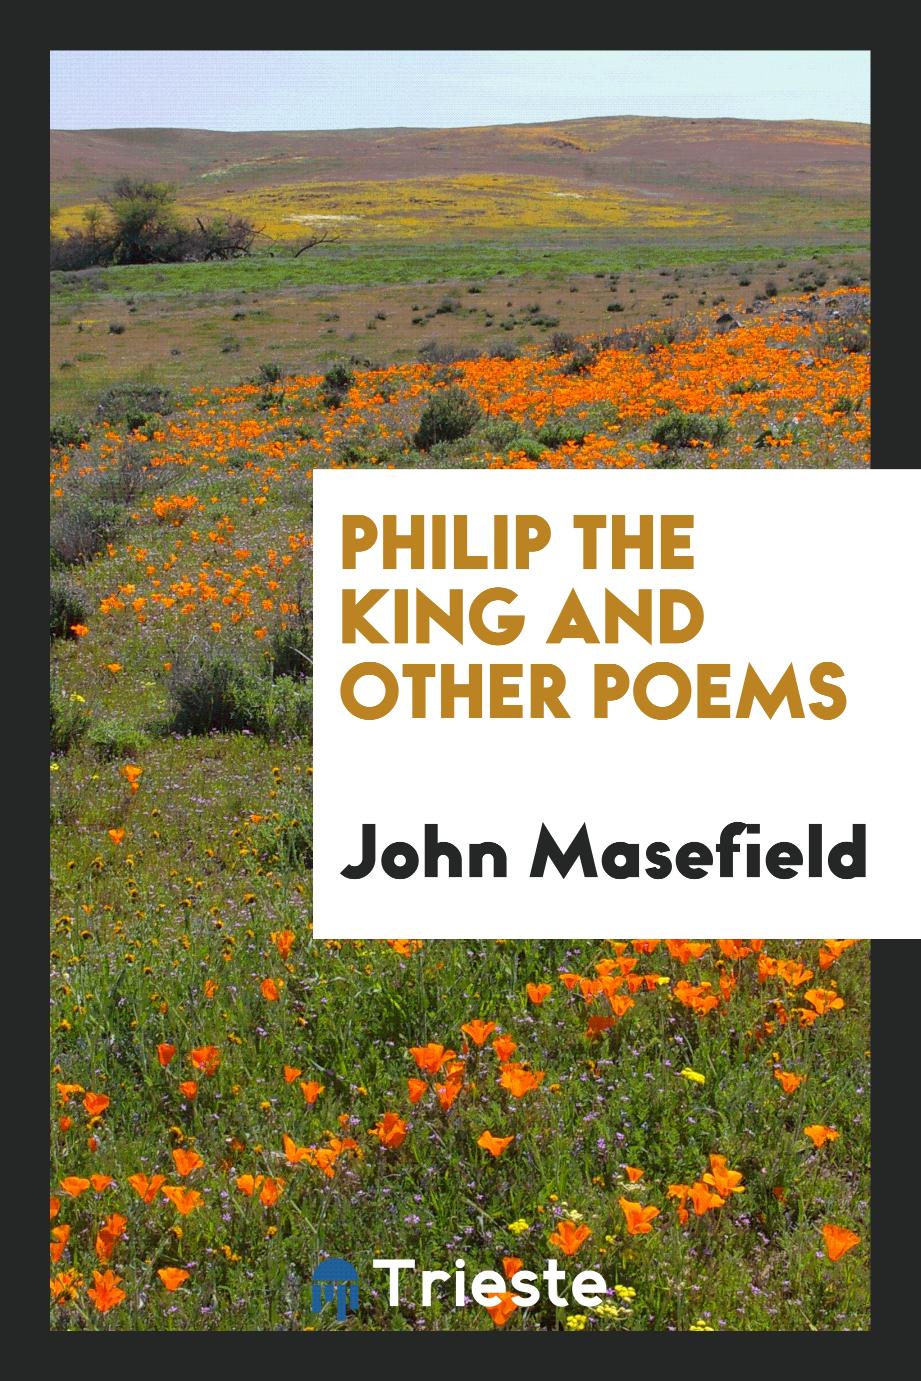 Philip the King and Other Poems